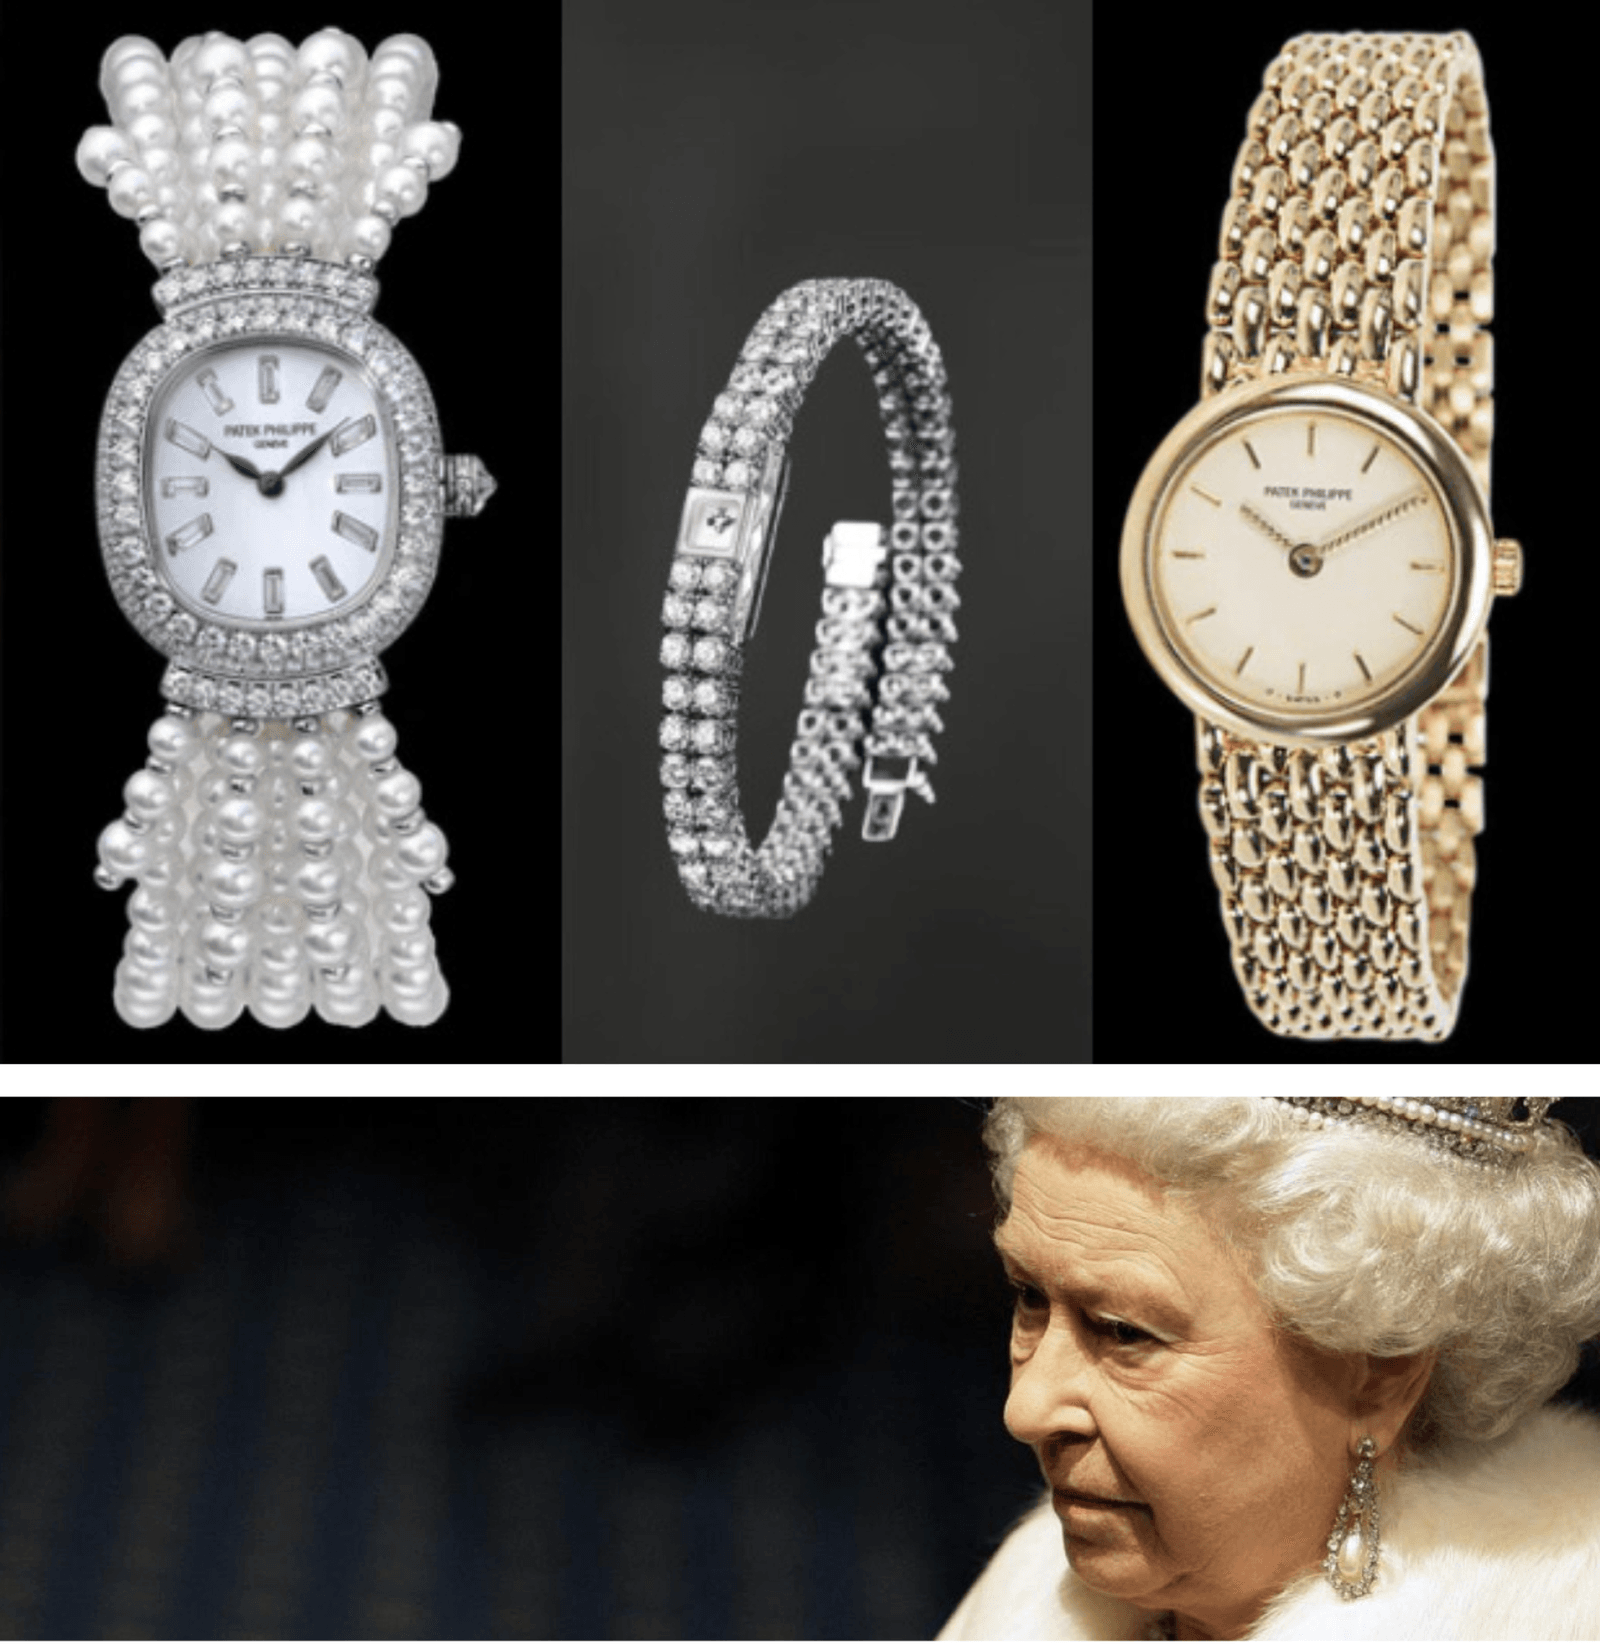 Some of the rare watches which Late Queen Elizabeth ll owned during her lifetime, source - royal.uk